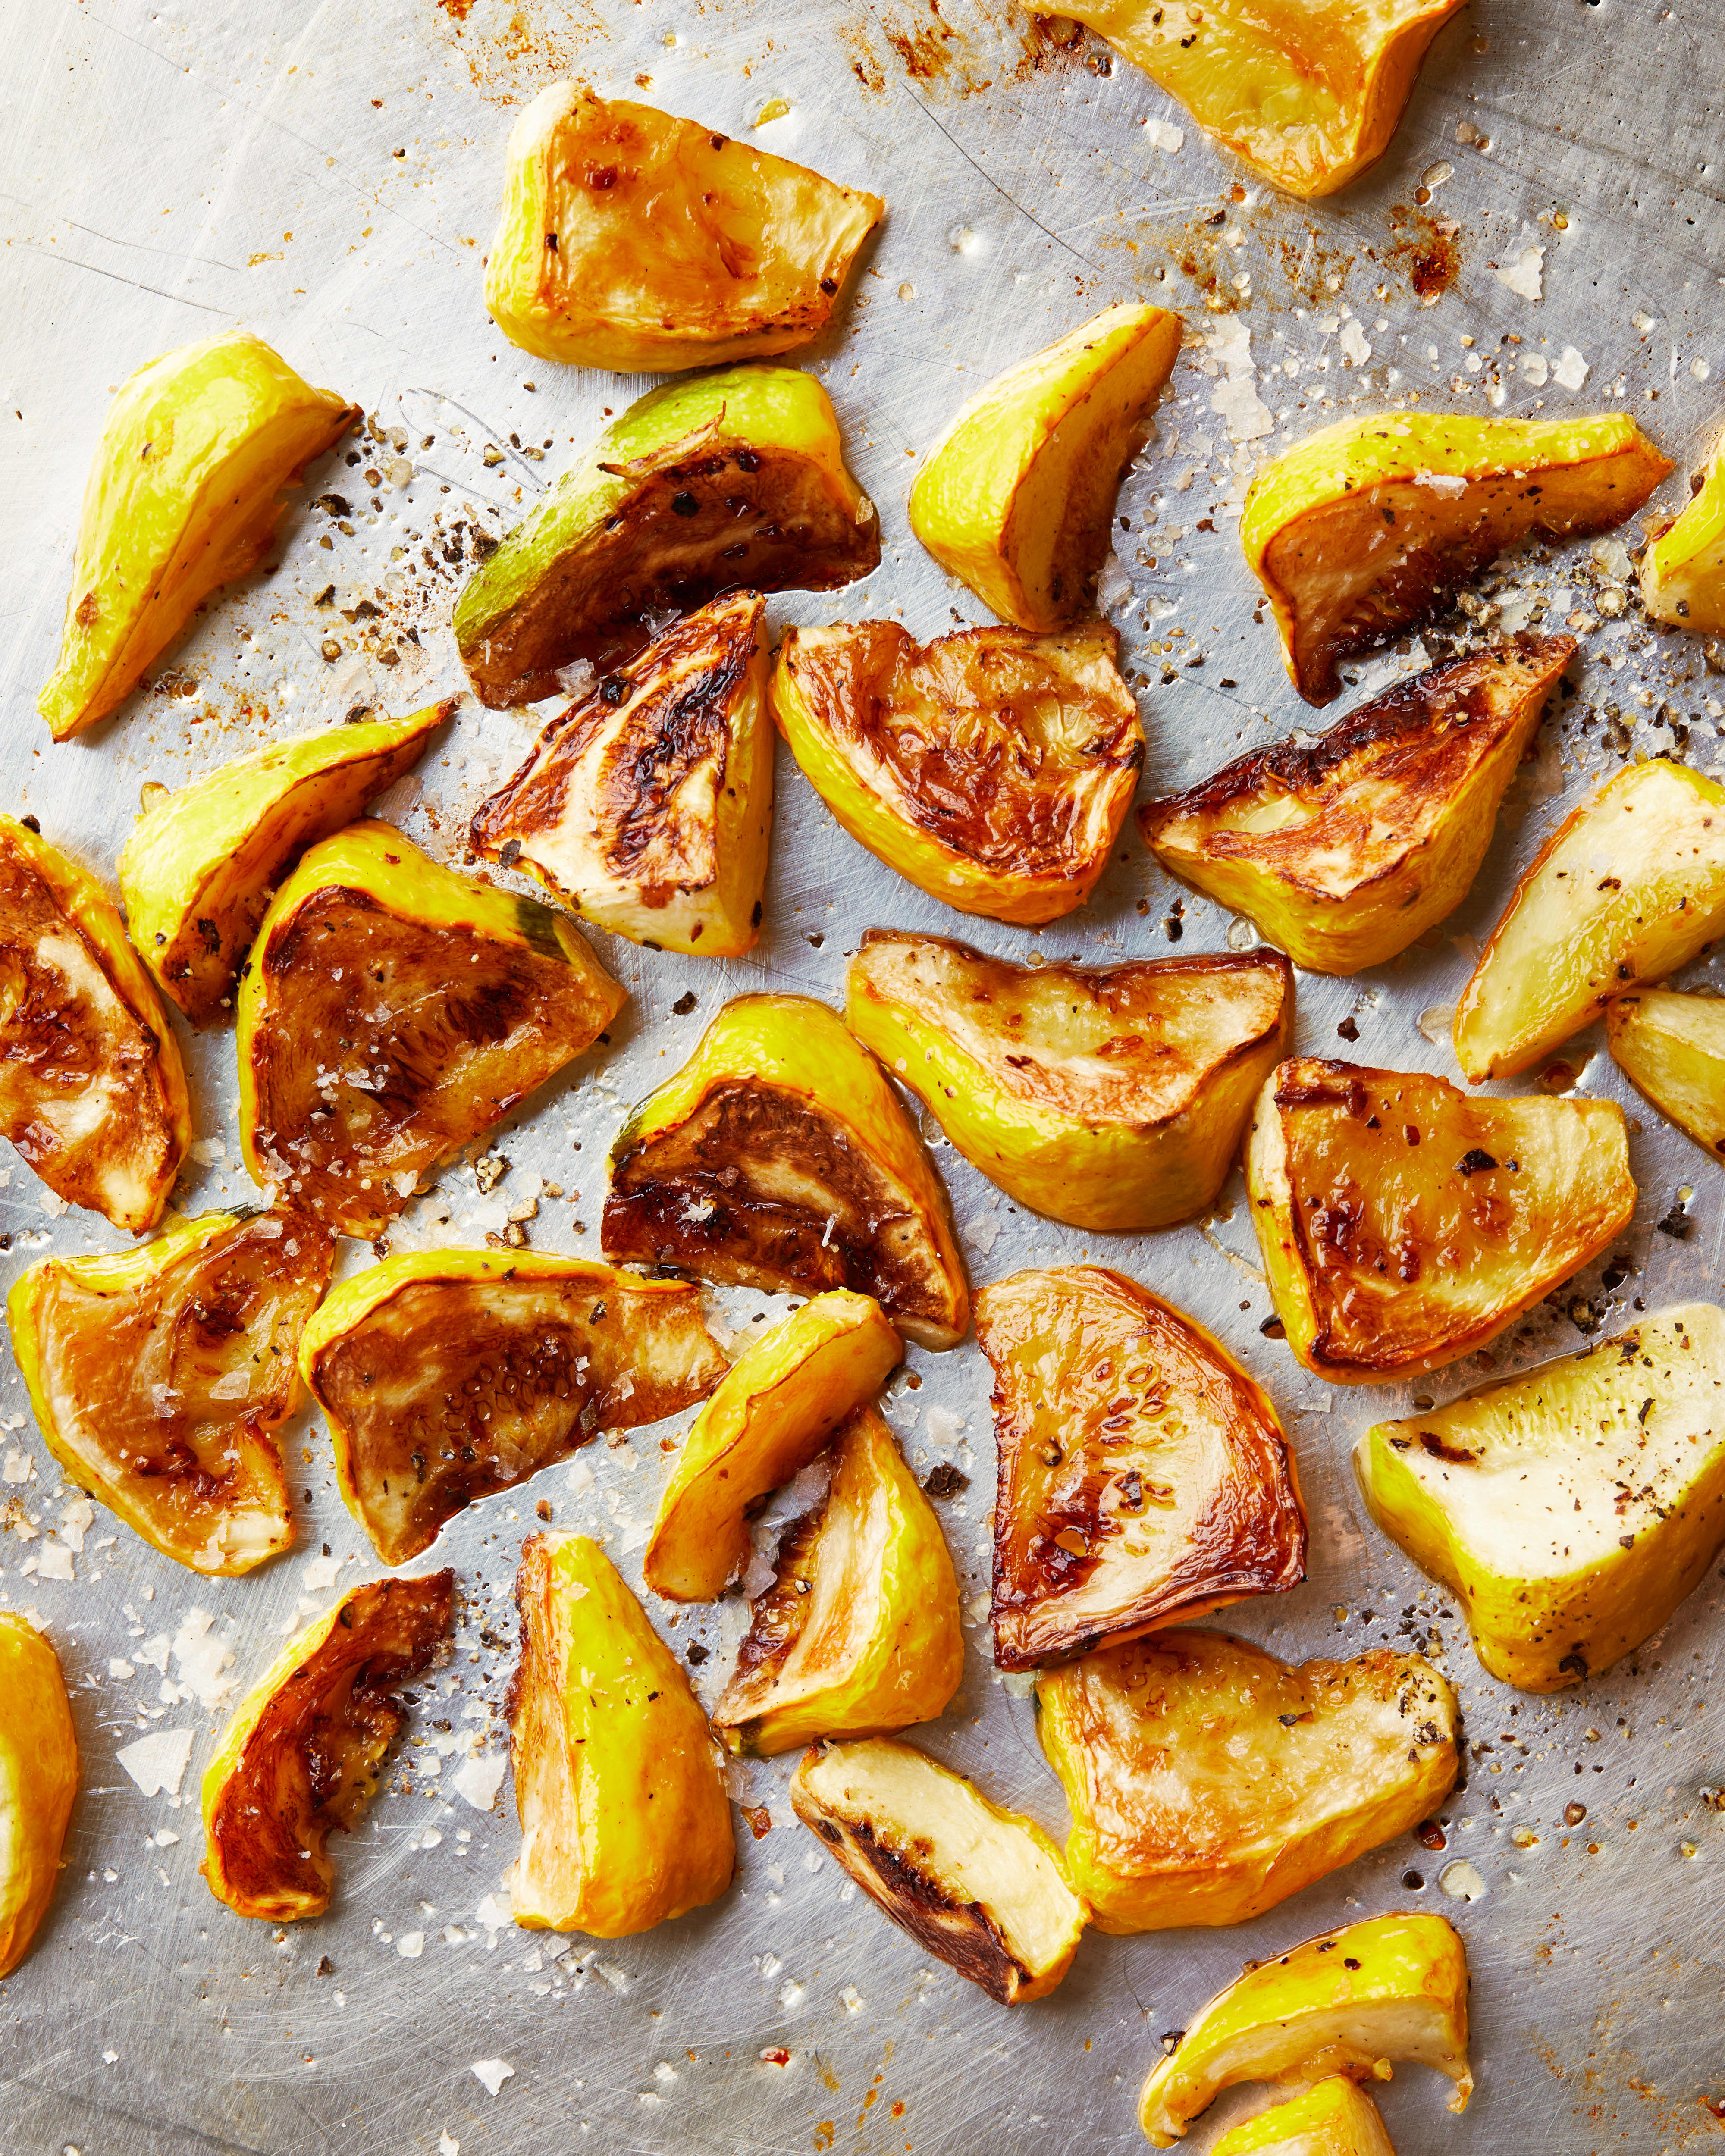 https://cdn.apartmenttherapy.info/image/upload/v1596061635/k/Photo/Recipes/2020-07-How-to-cook-patty-pan-squash-3-ways/How-to-Patty-Pan-Squash-Roasted/Kitchn_HowTo_PattyPanSquash_0416.jpg